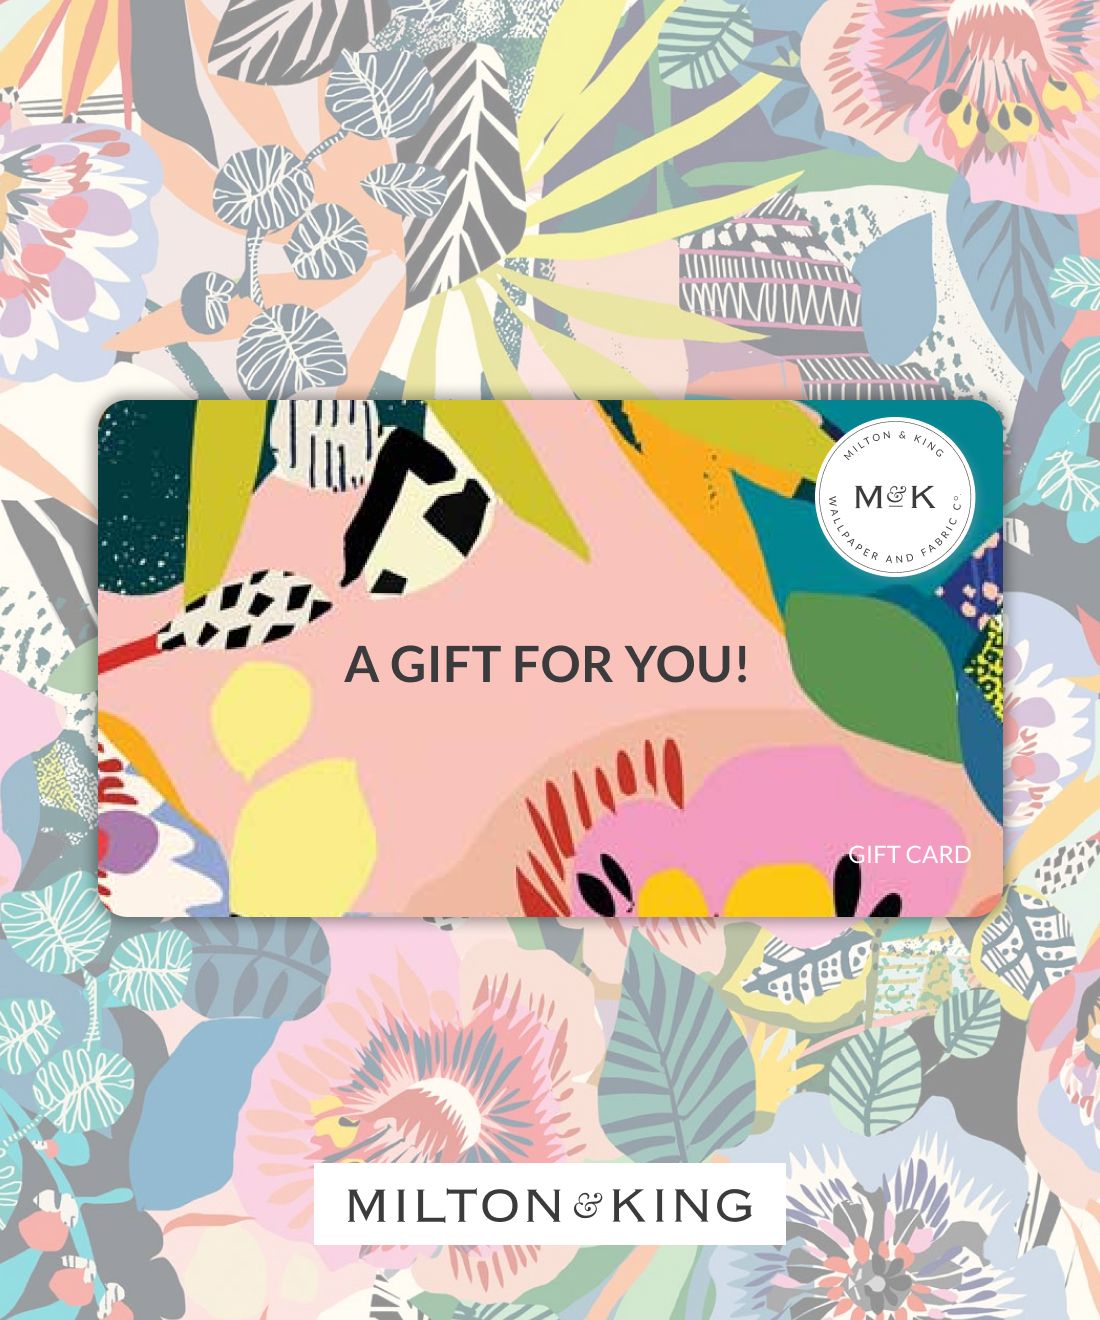 Gift Card - A gift for you